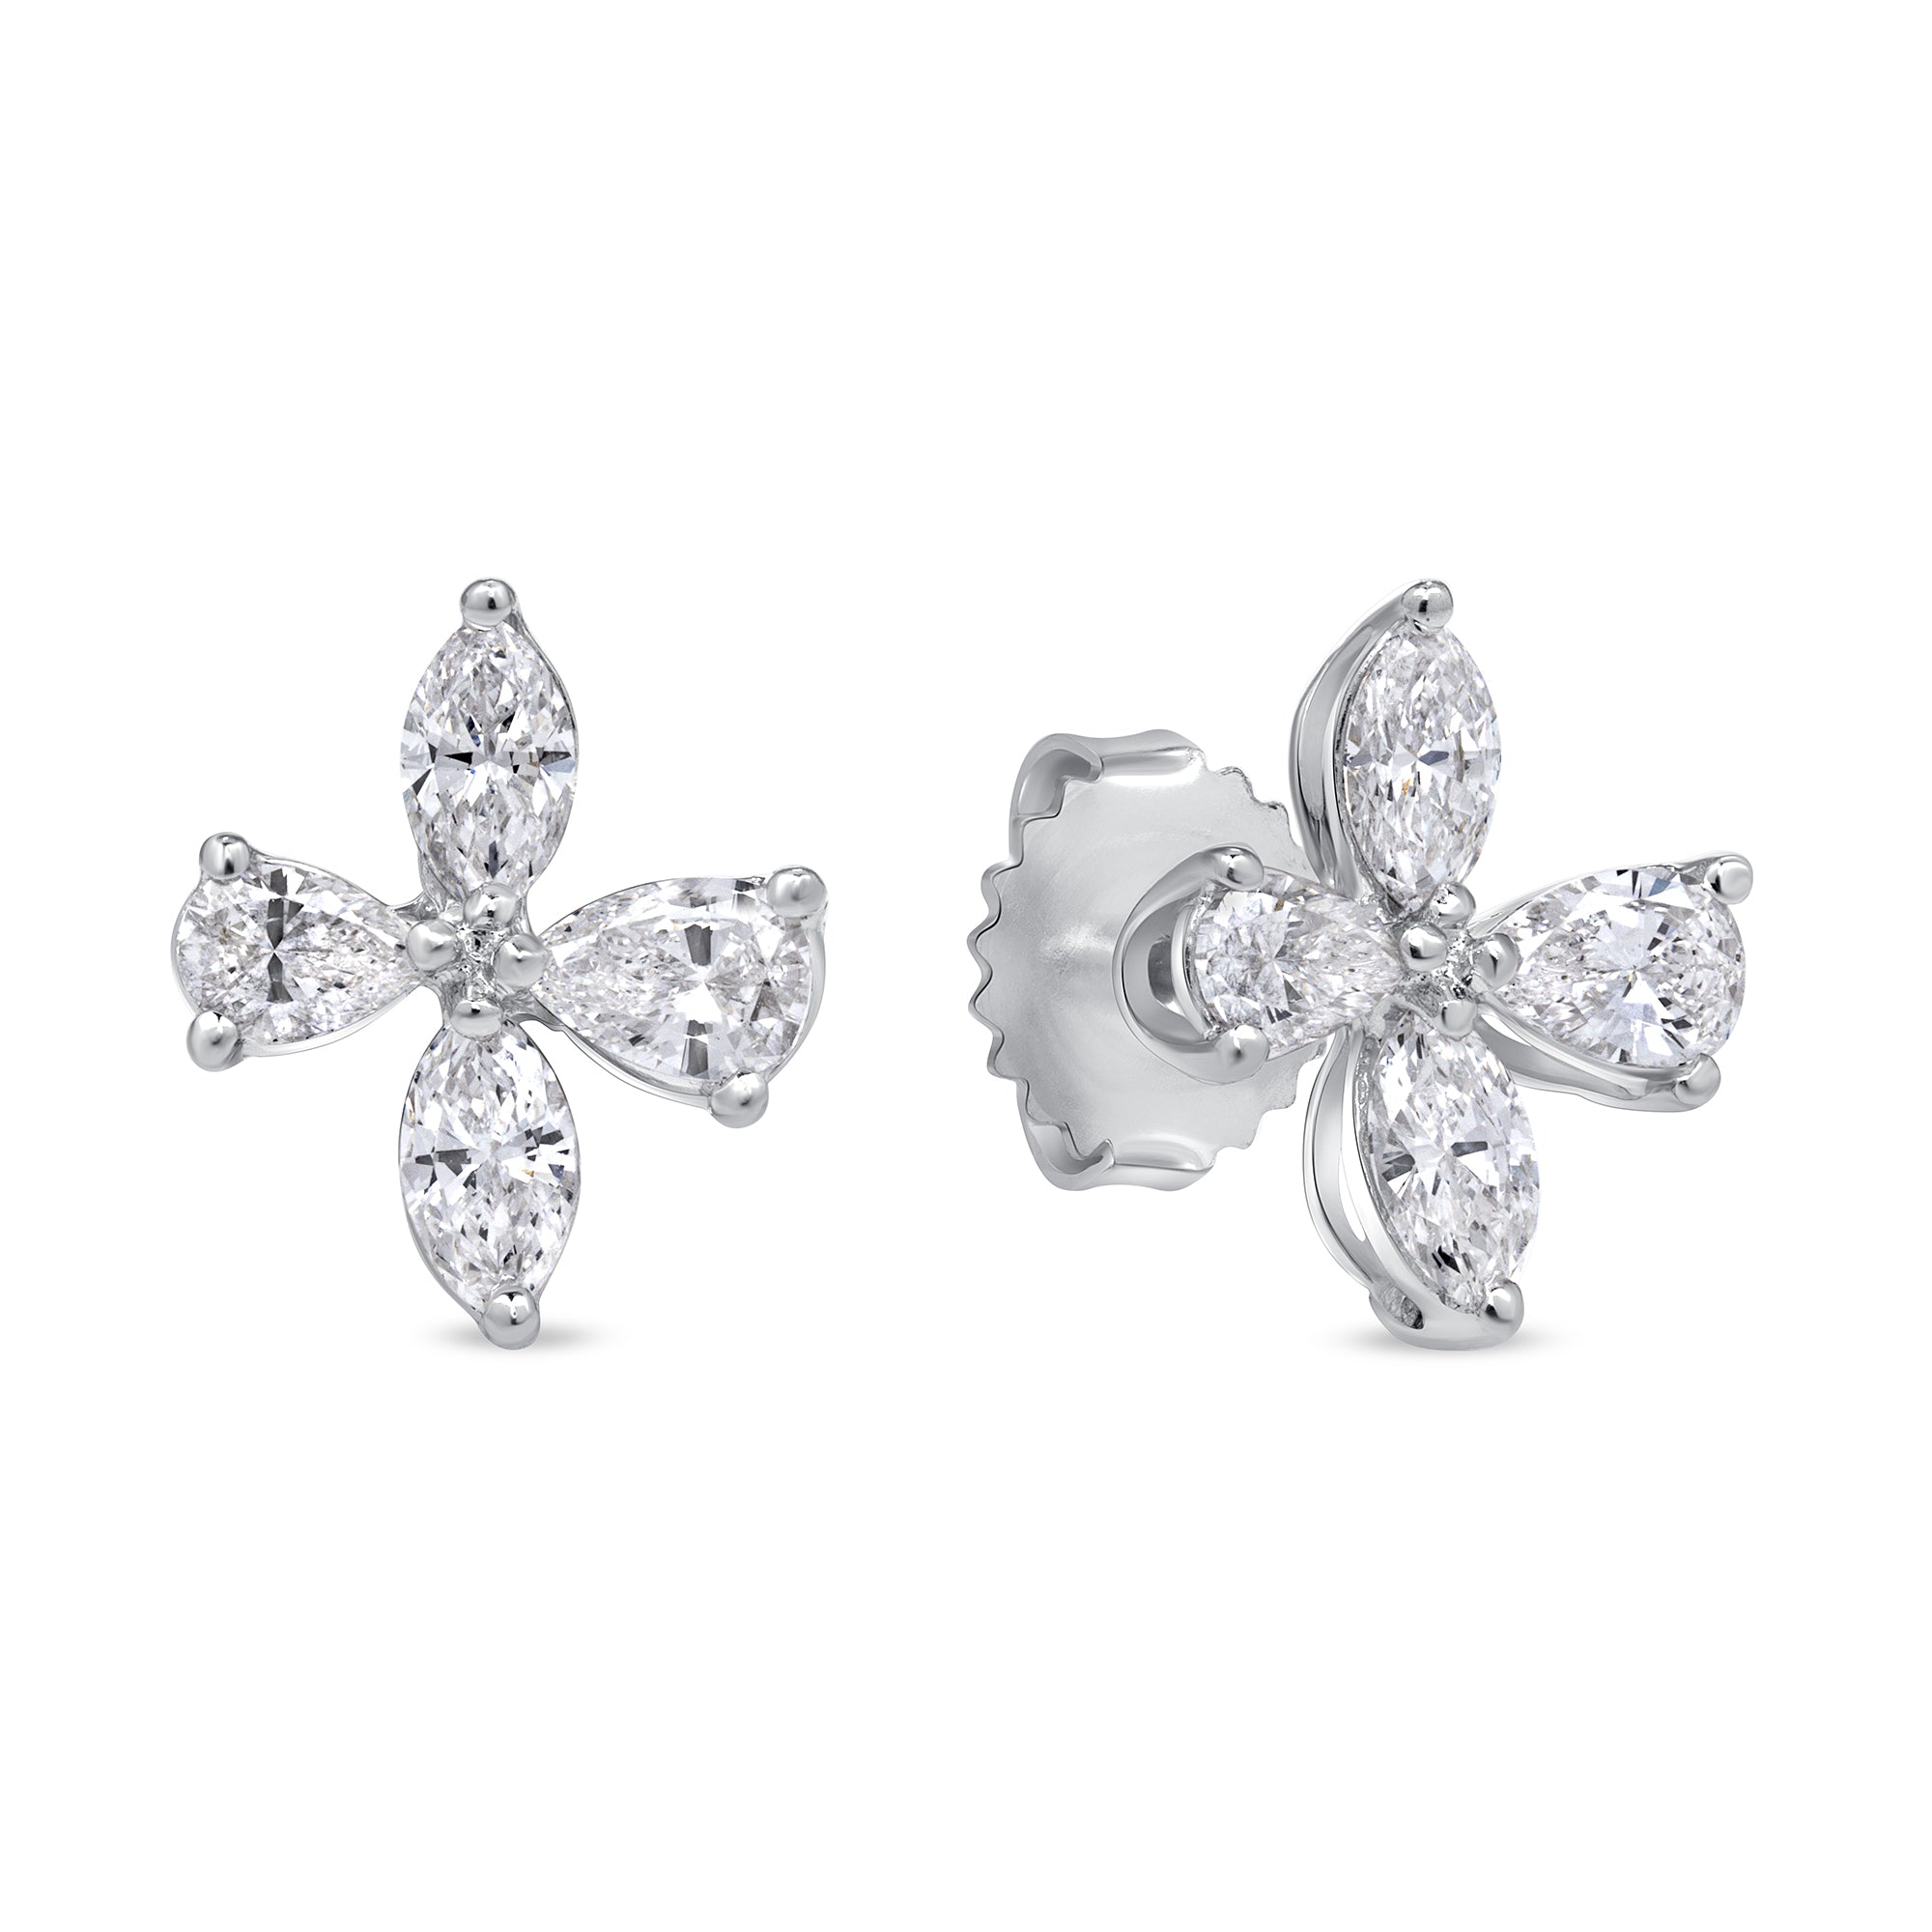 Marquise And Pear Shape Diamond Earrings In 18 Karat White Gold